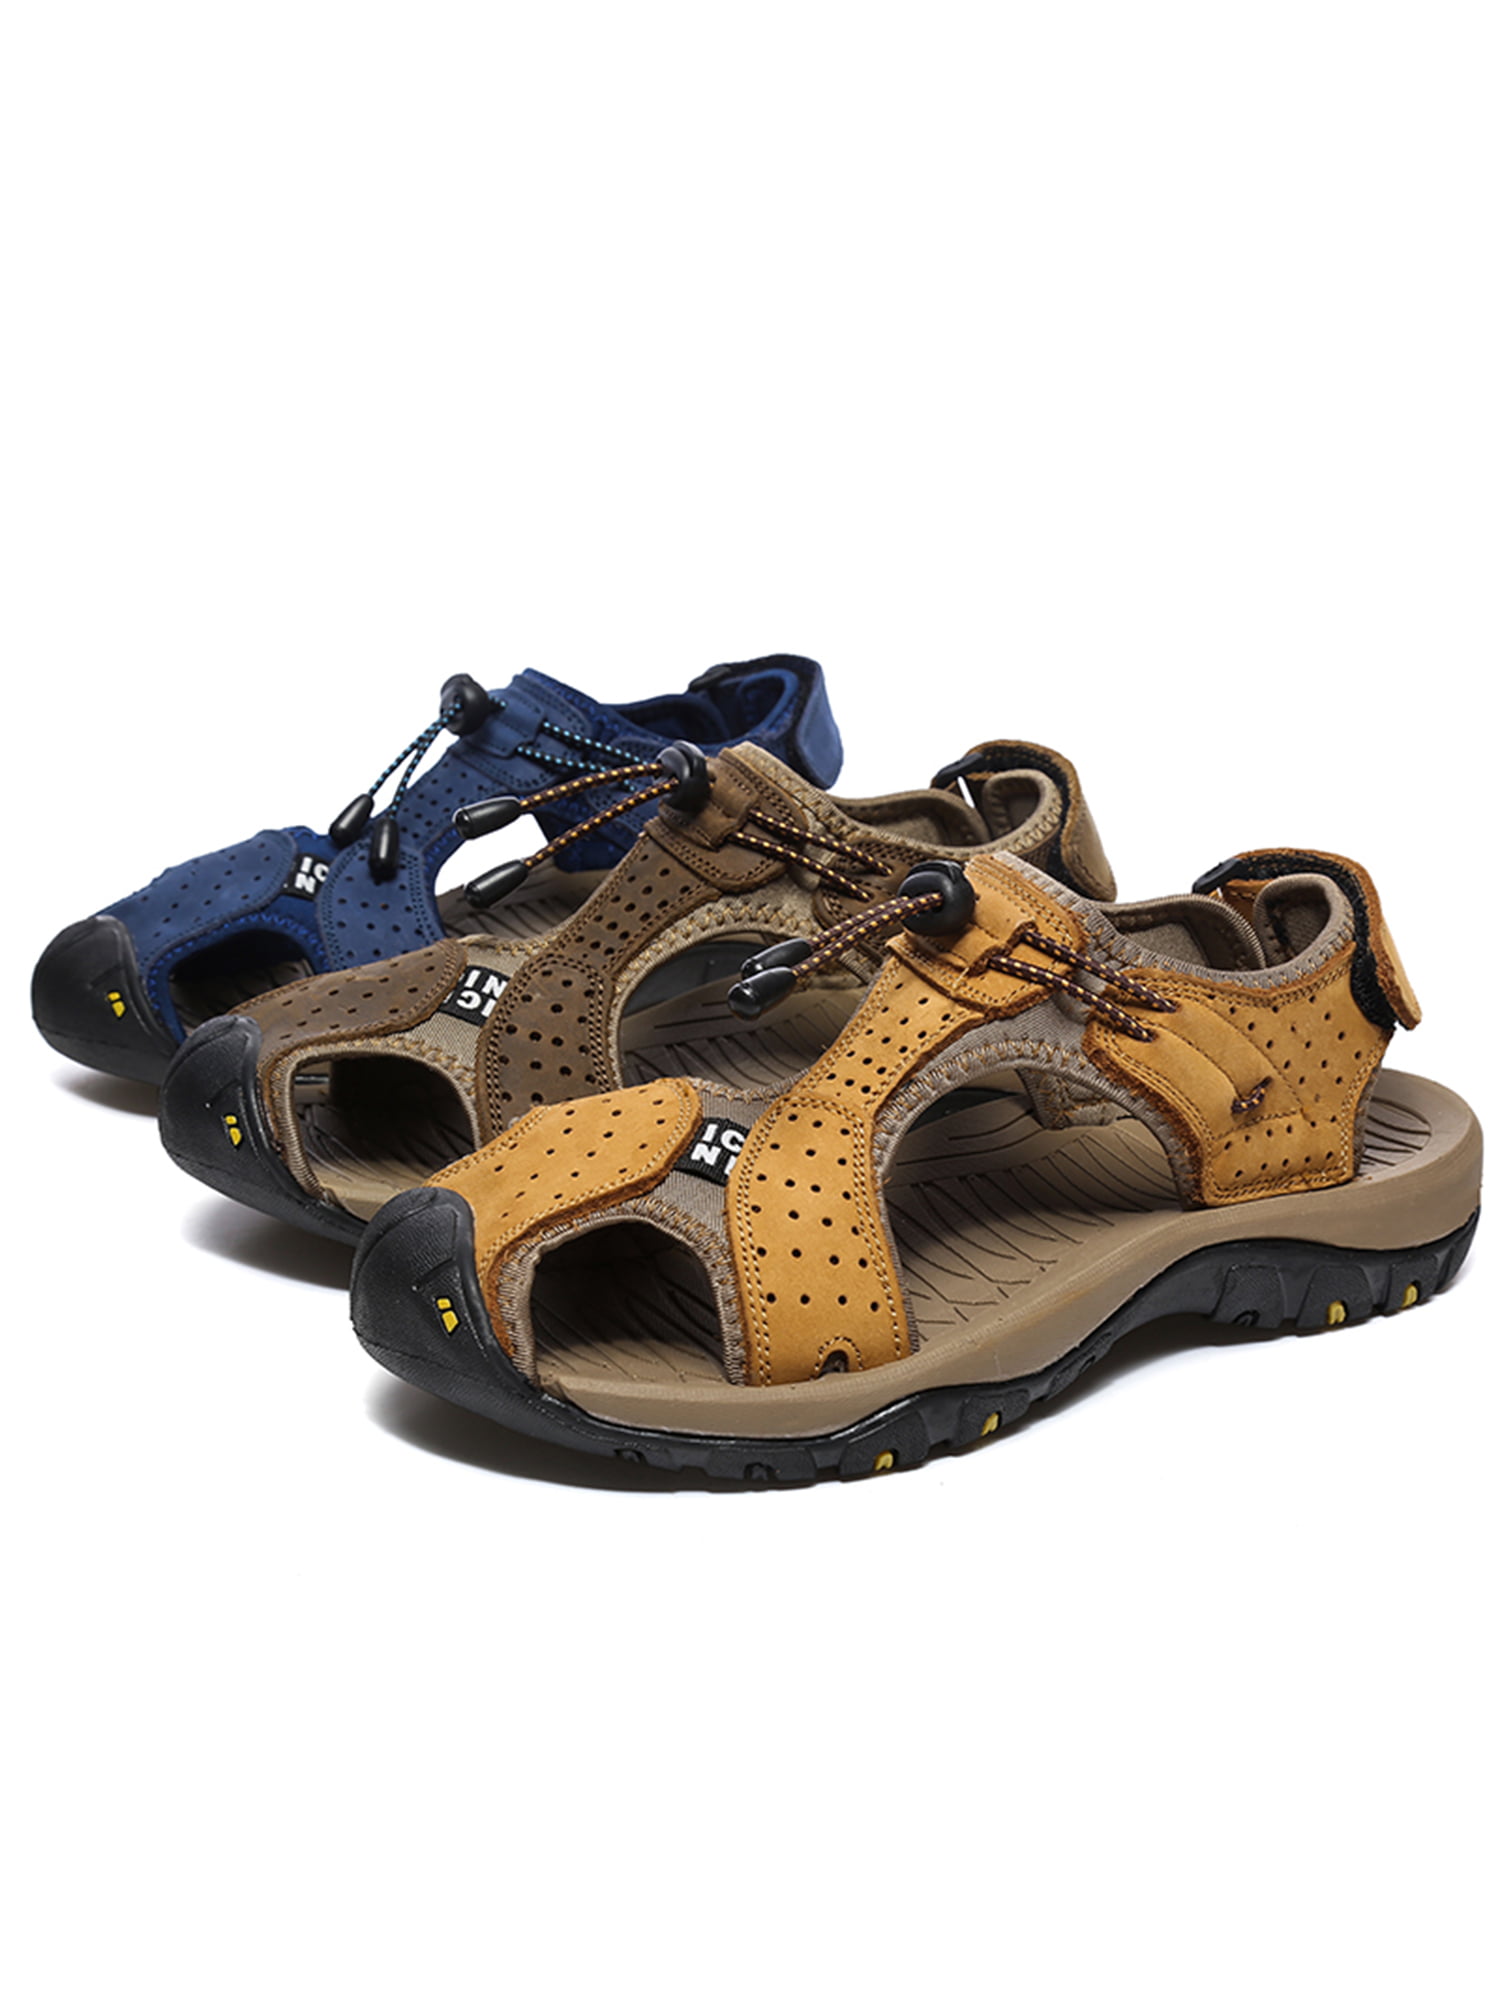 Men's Outdoor Hiking Genuine Leather Sandal Closed Toe Summer Fisherman Shoes SZ 